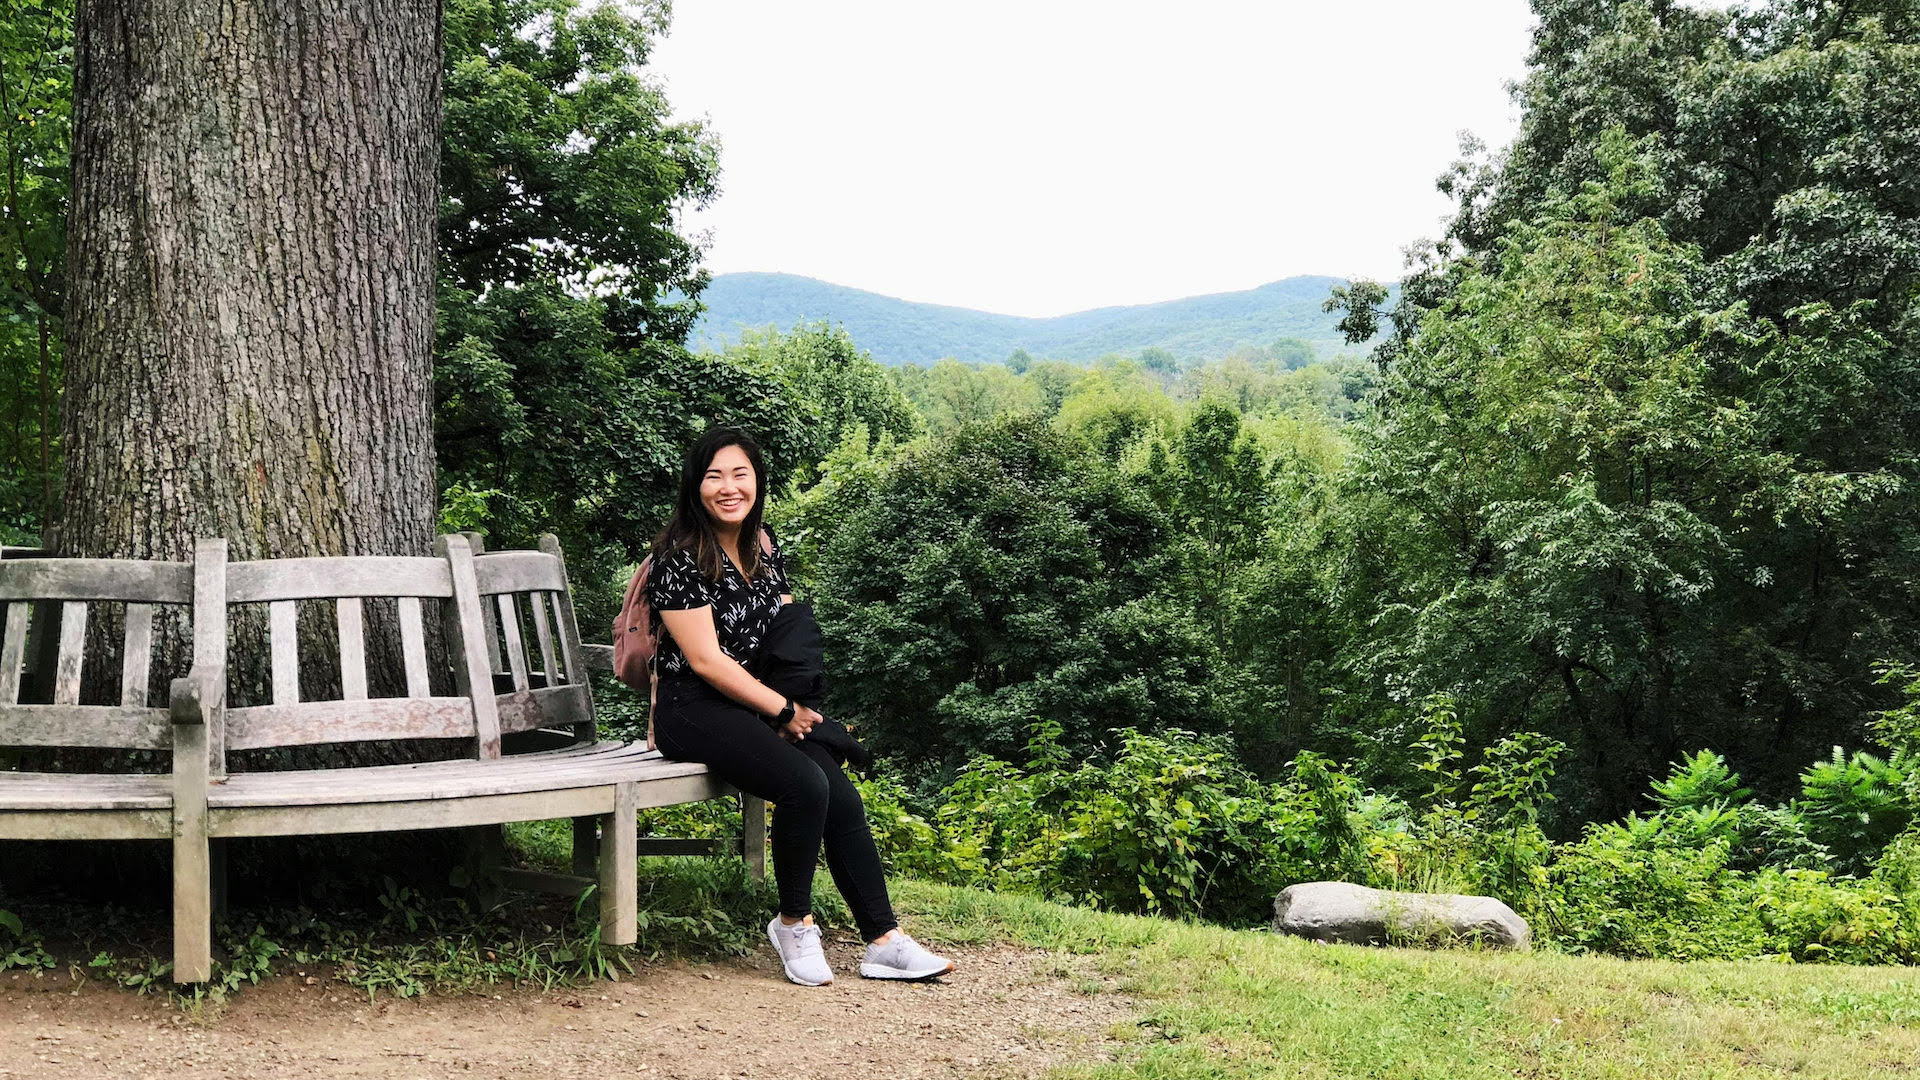 Emily Chu is sitting on a. bench, surrounded by trees.